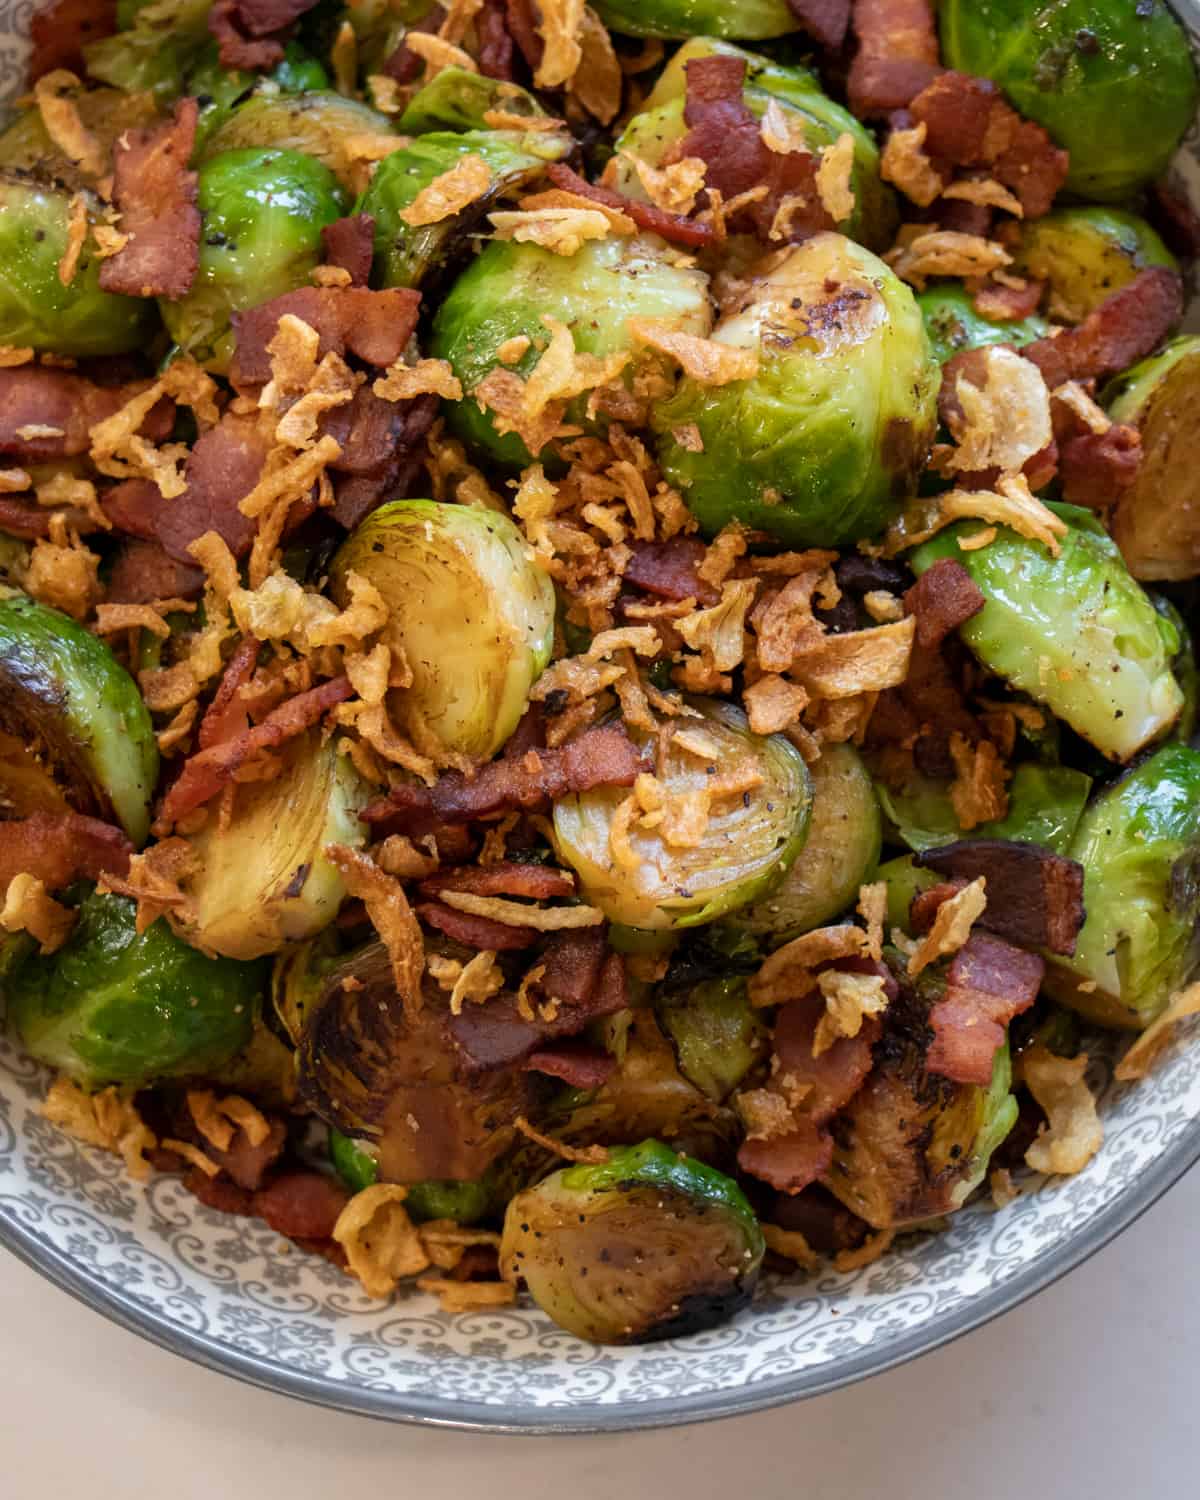 Fried Brussels sprouts with bacon and fried onions.